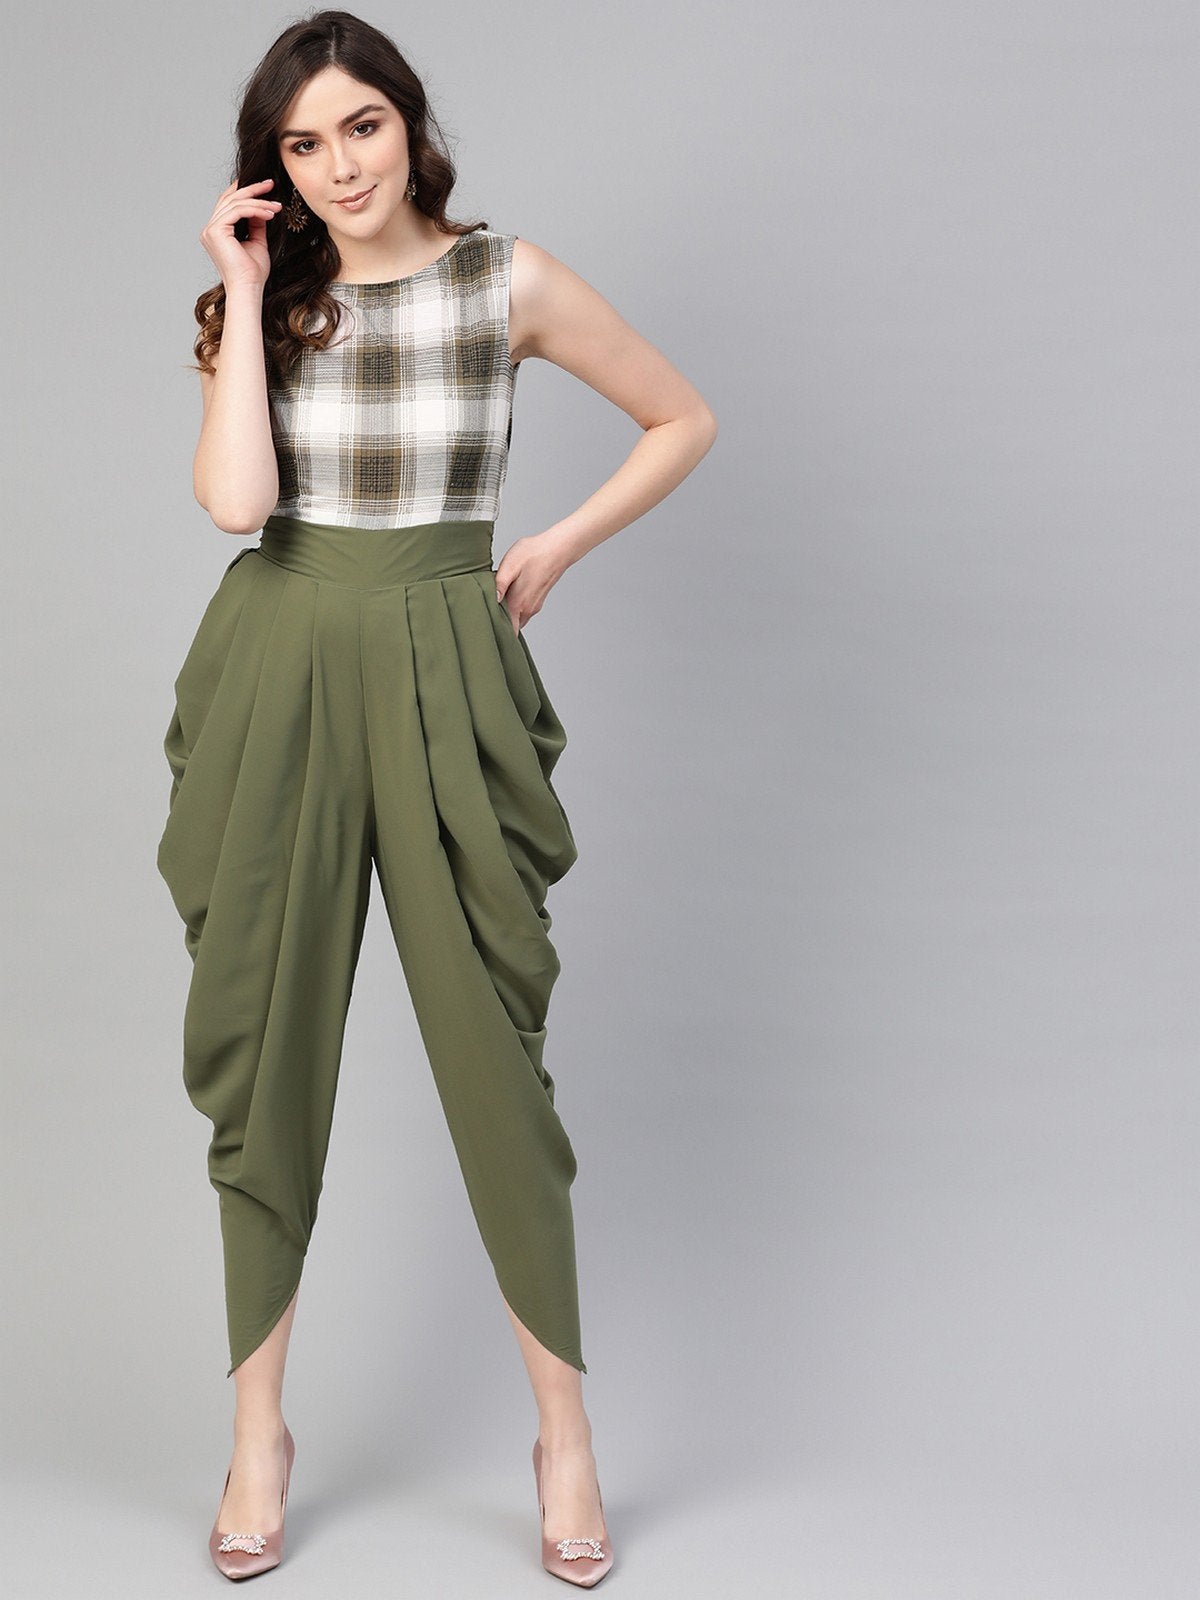 Women's Olive Checkered Cowl Jumpsuit - Pannkh